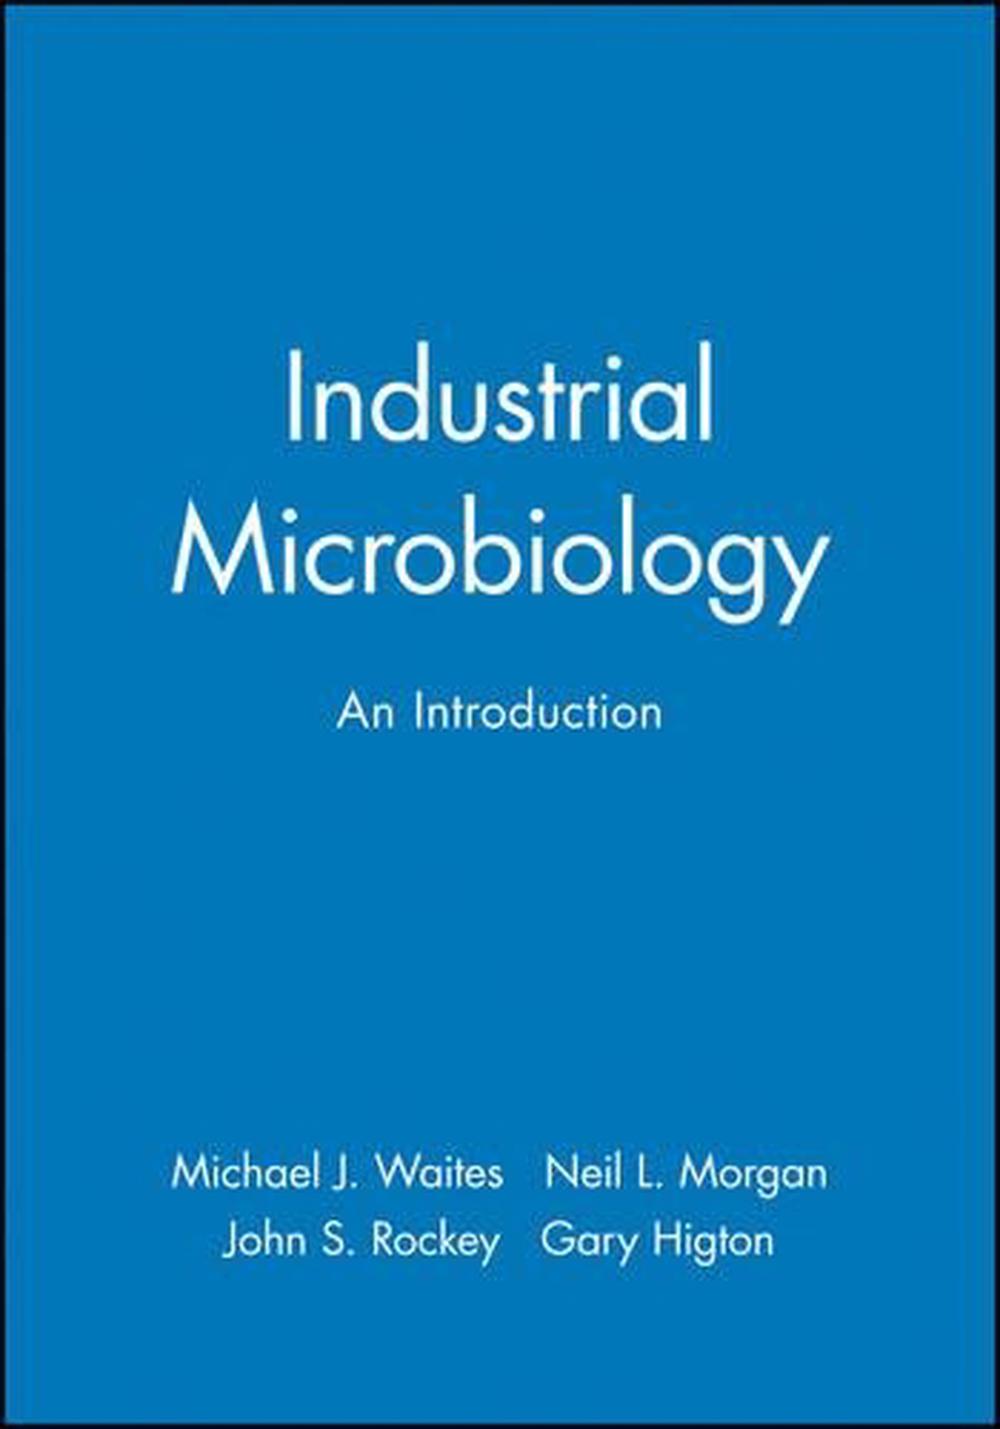 research topics on industrial microbiology